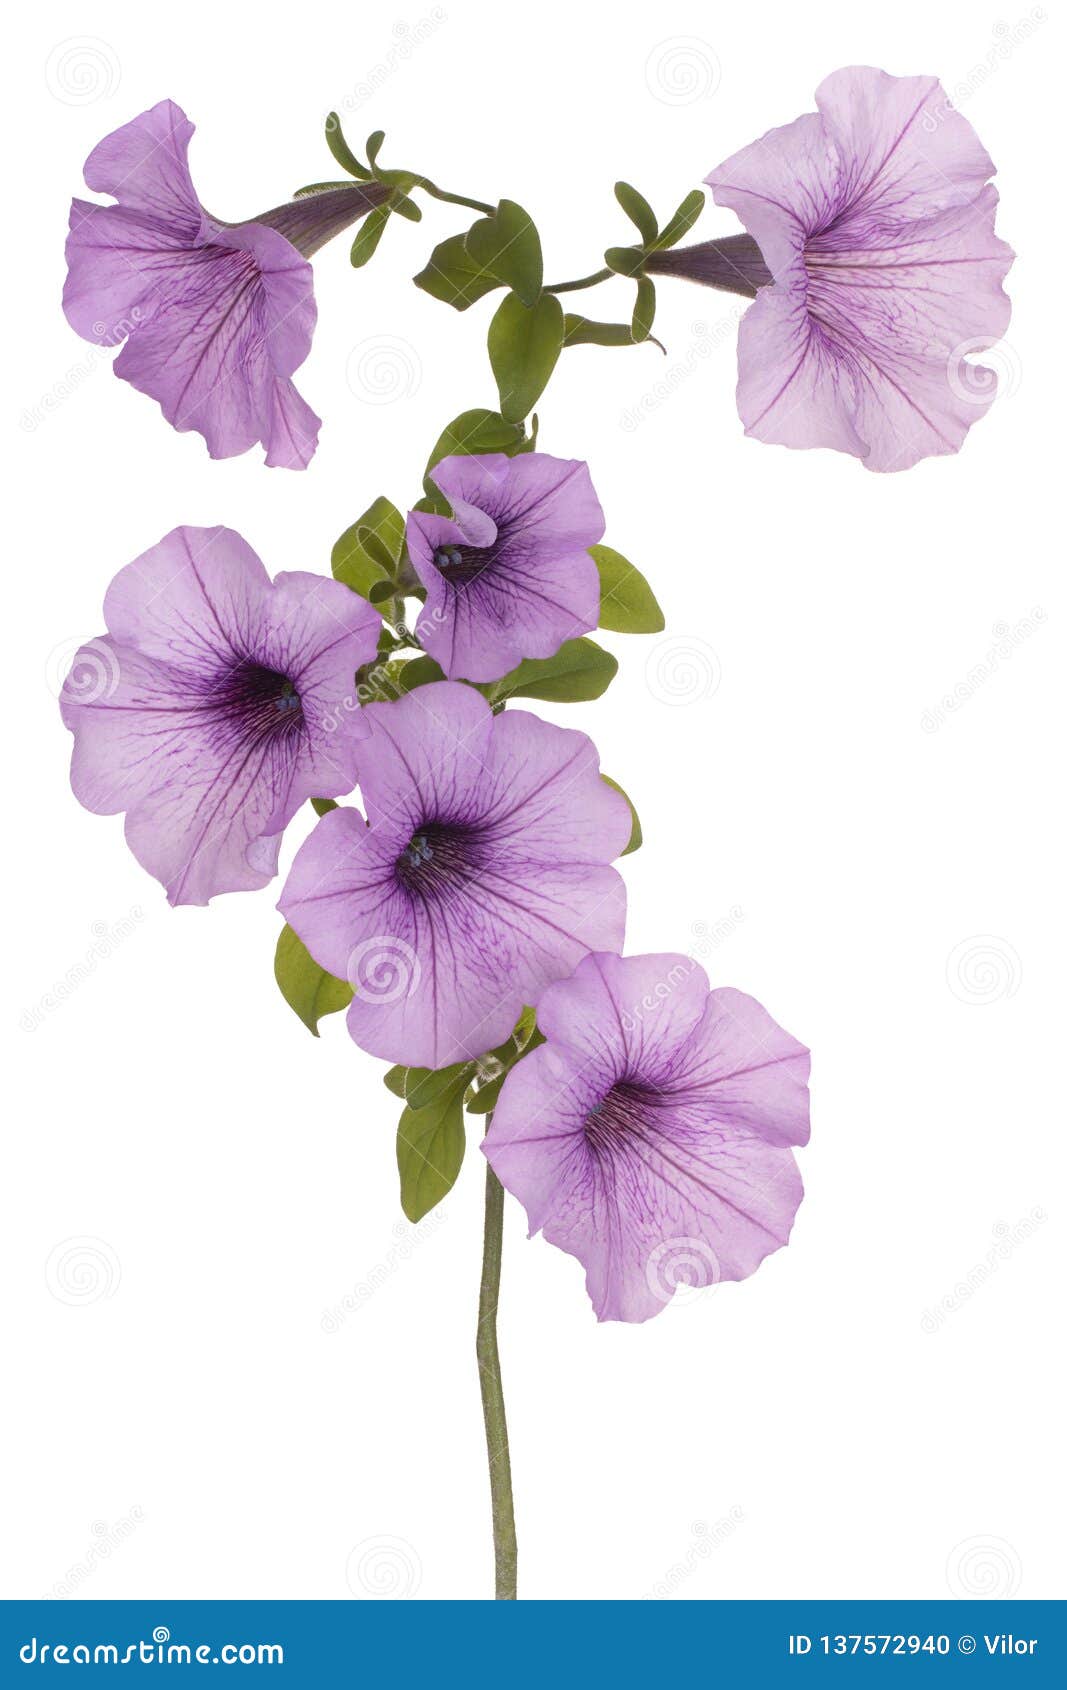 Petunia flower isolated stock photo. Image of natural - 137572940